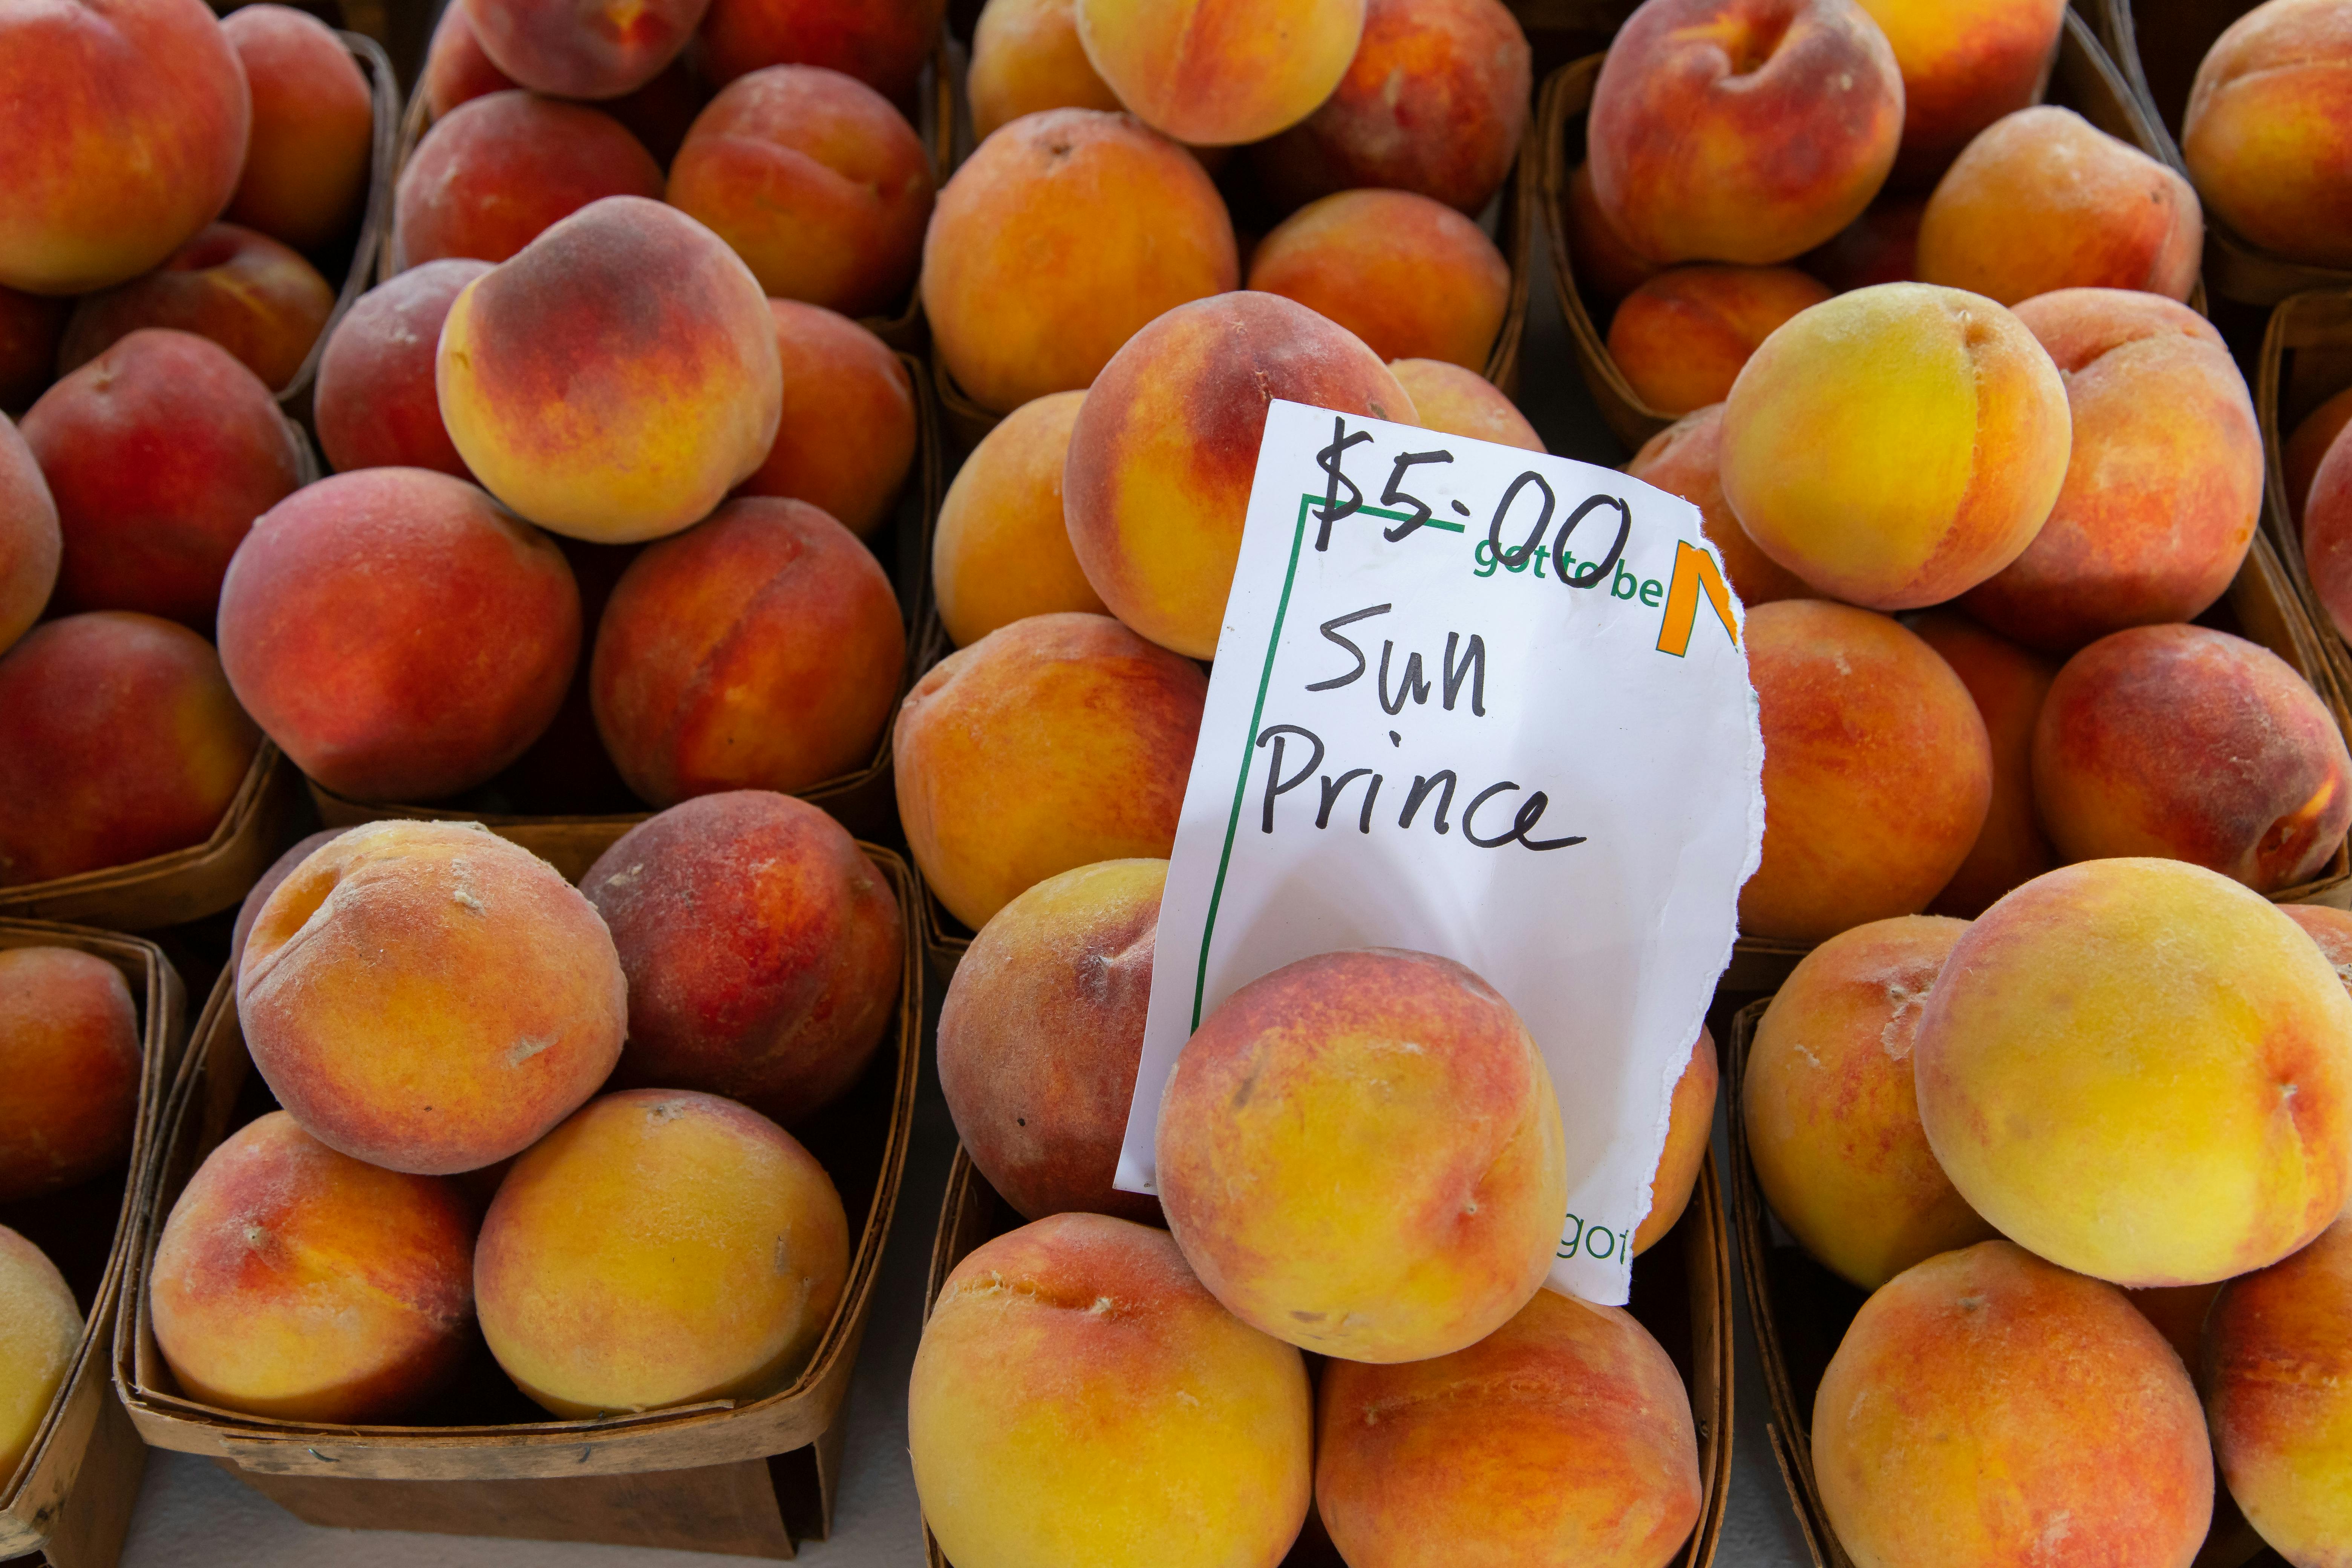 price tag on top of fruits